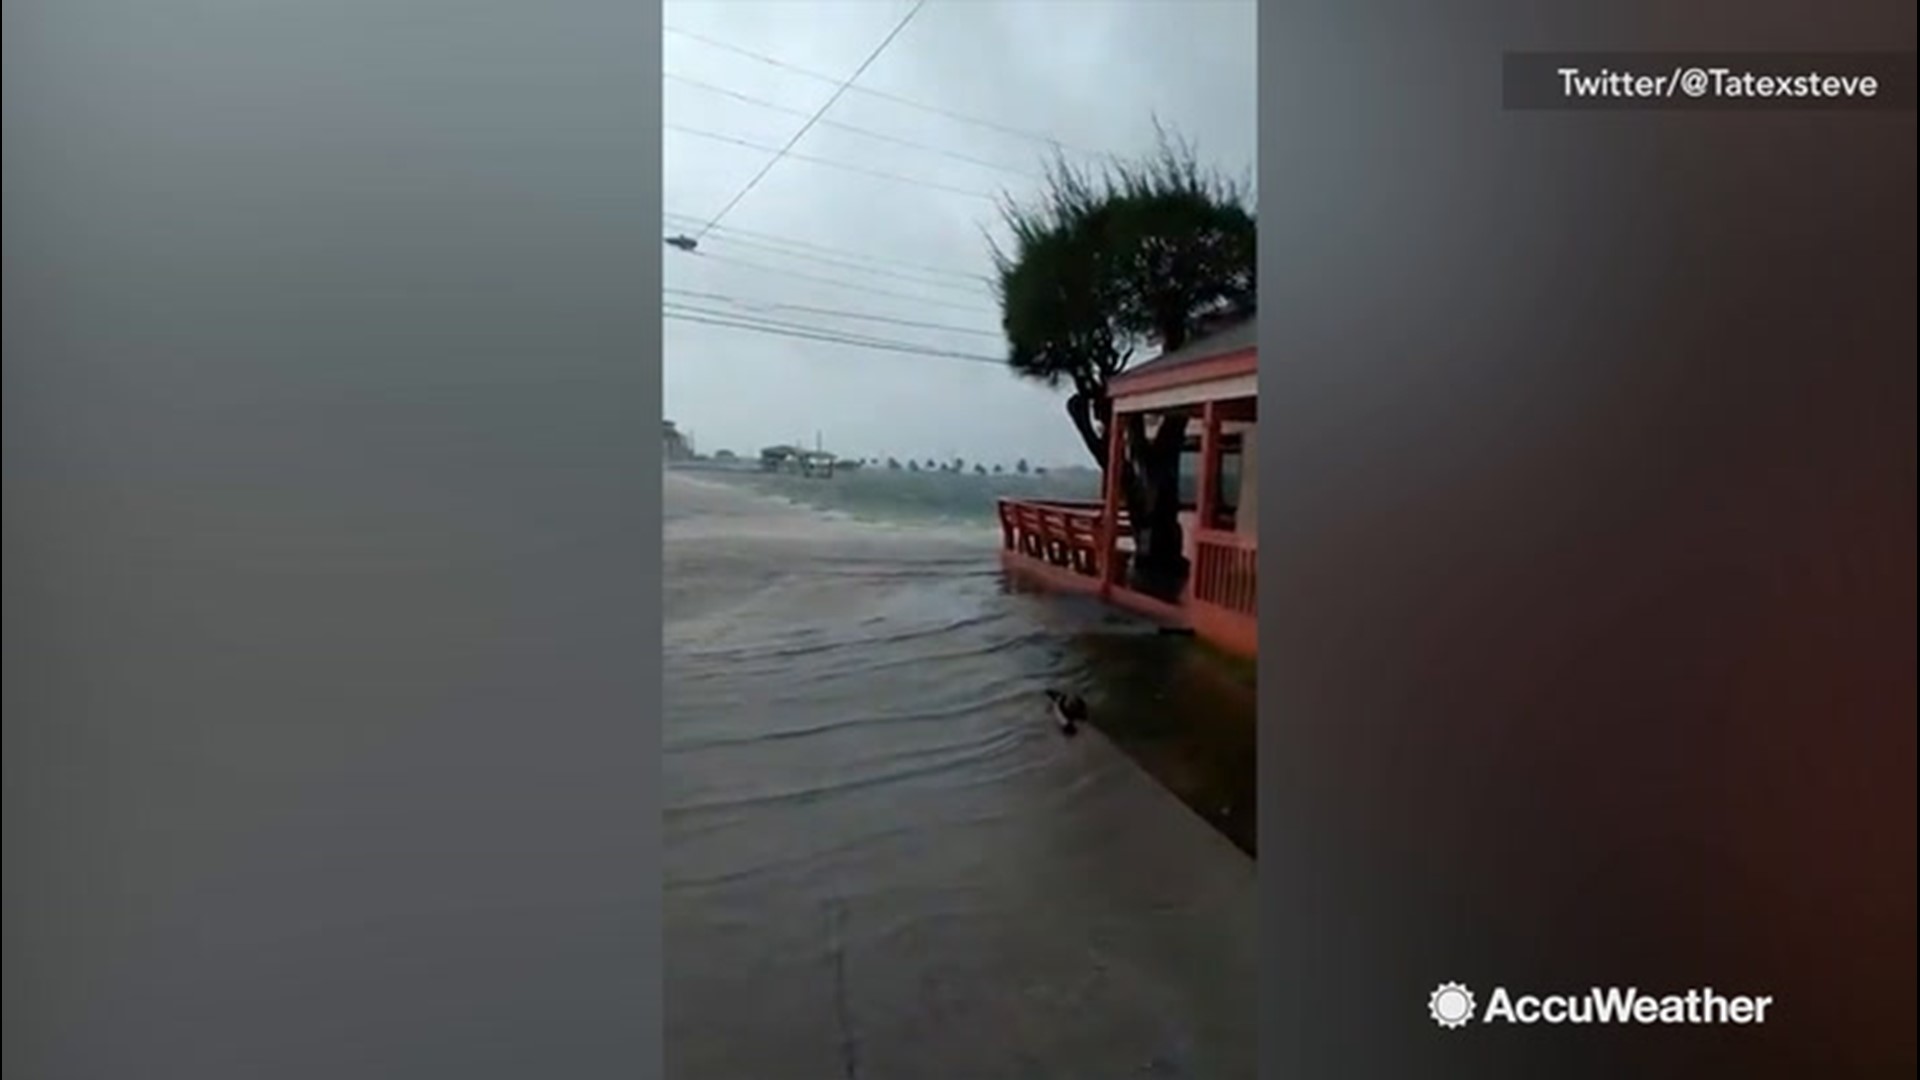 As Hurricane Dorian hits the Bahamas, residents can do nothing but hunker down for safety. However, before the storm even made landfall on Sunday, Sept. 1, the storm was doing damage as you can see from the video.